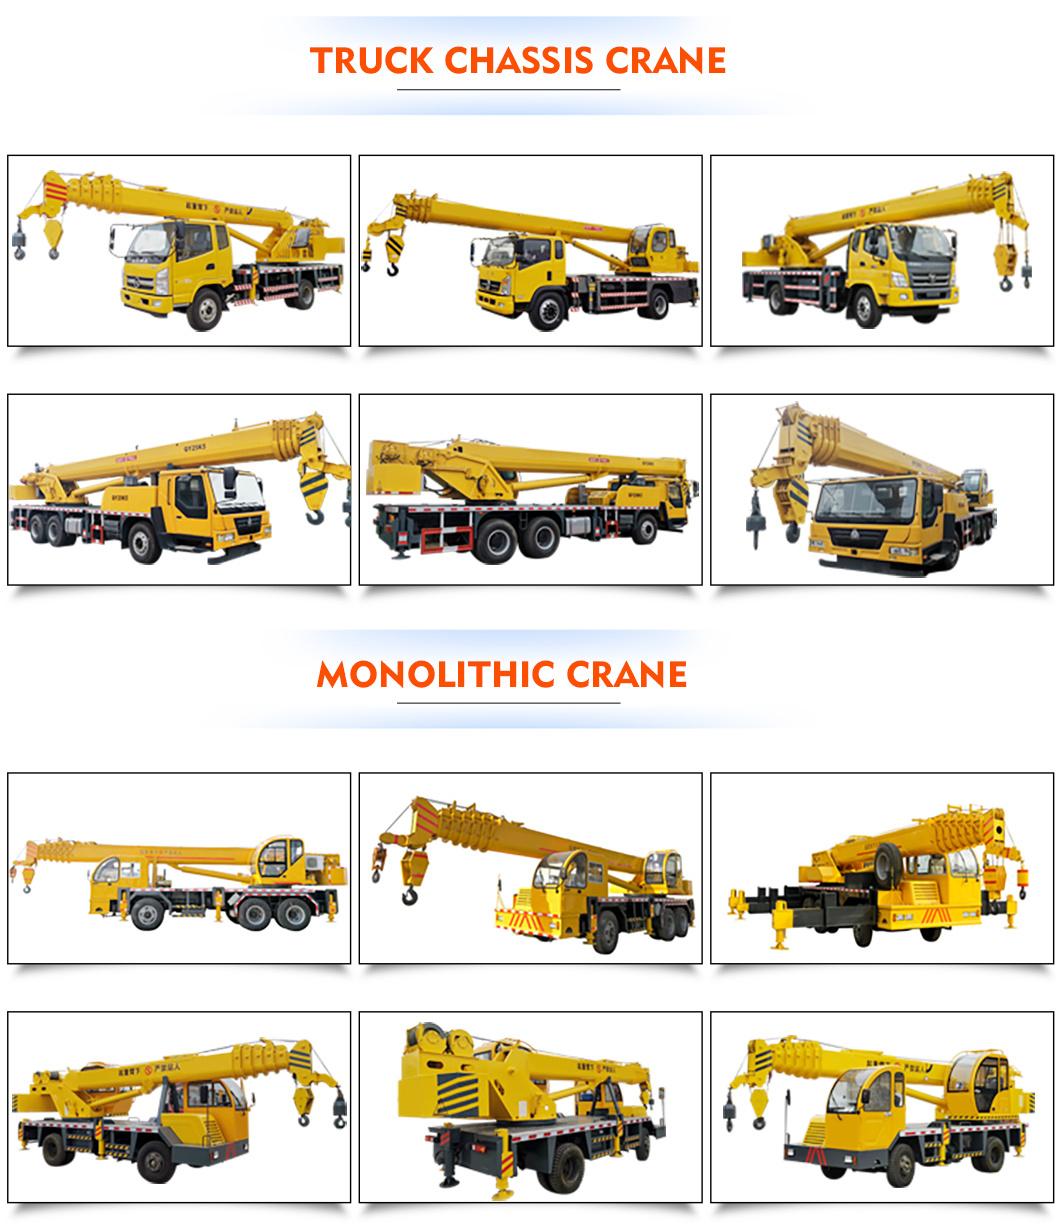 Double Pump Confluence Technology 8 Ton Truck Crane Small Cranes for Pick up